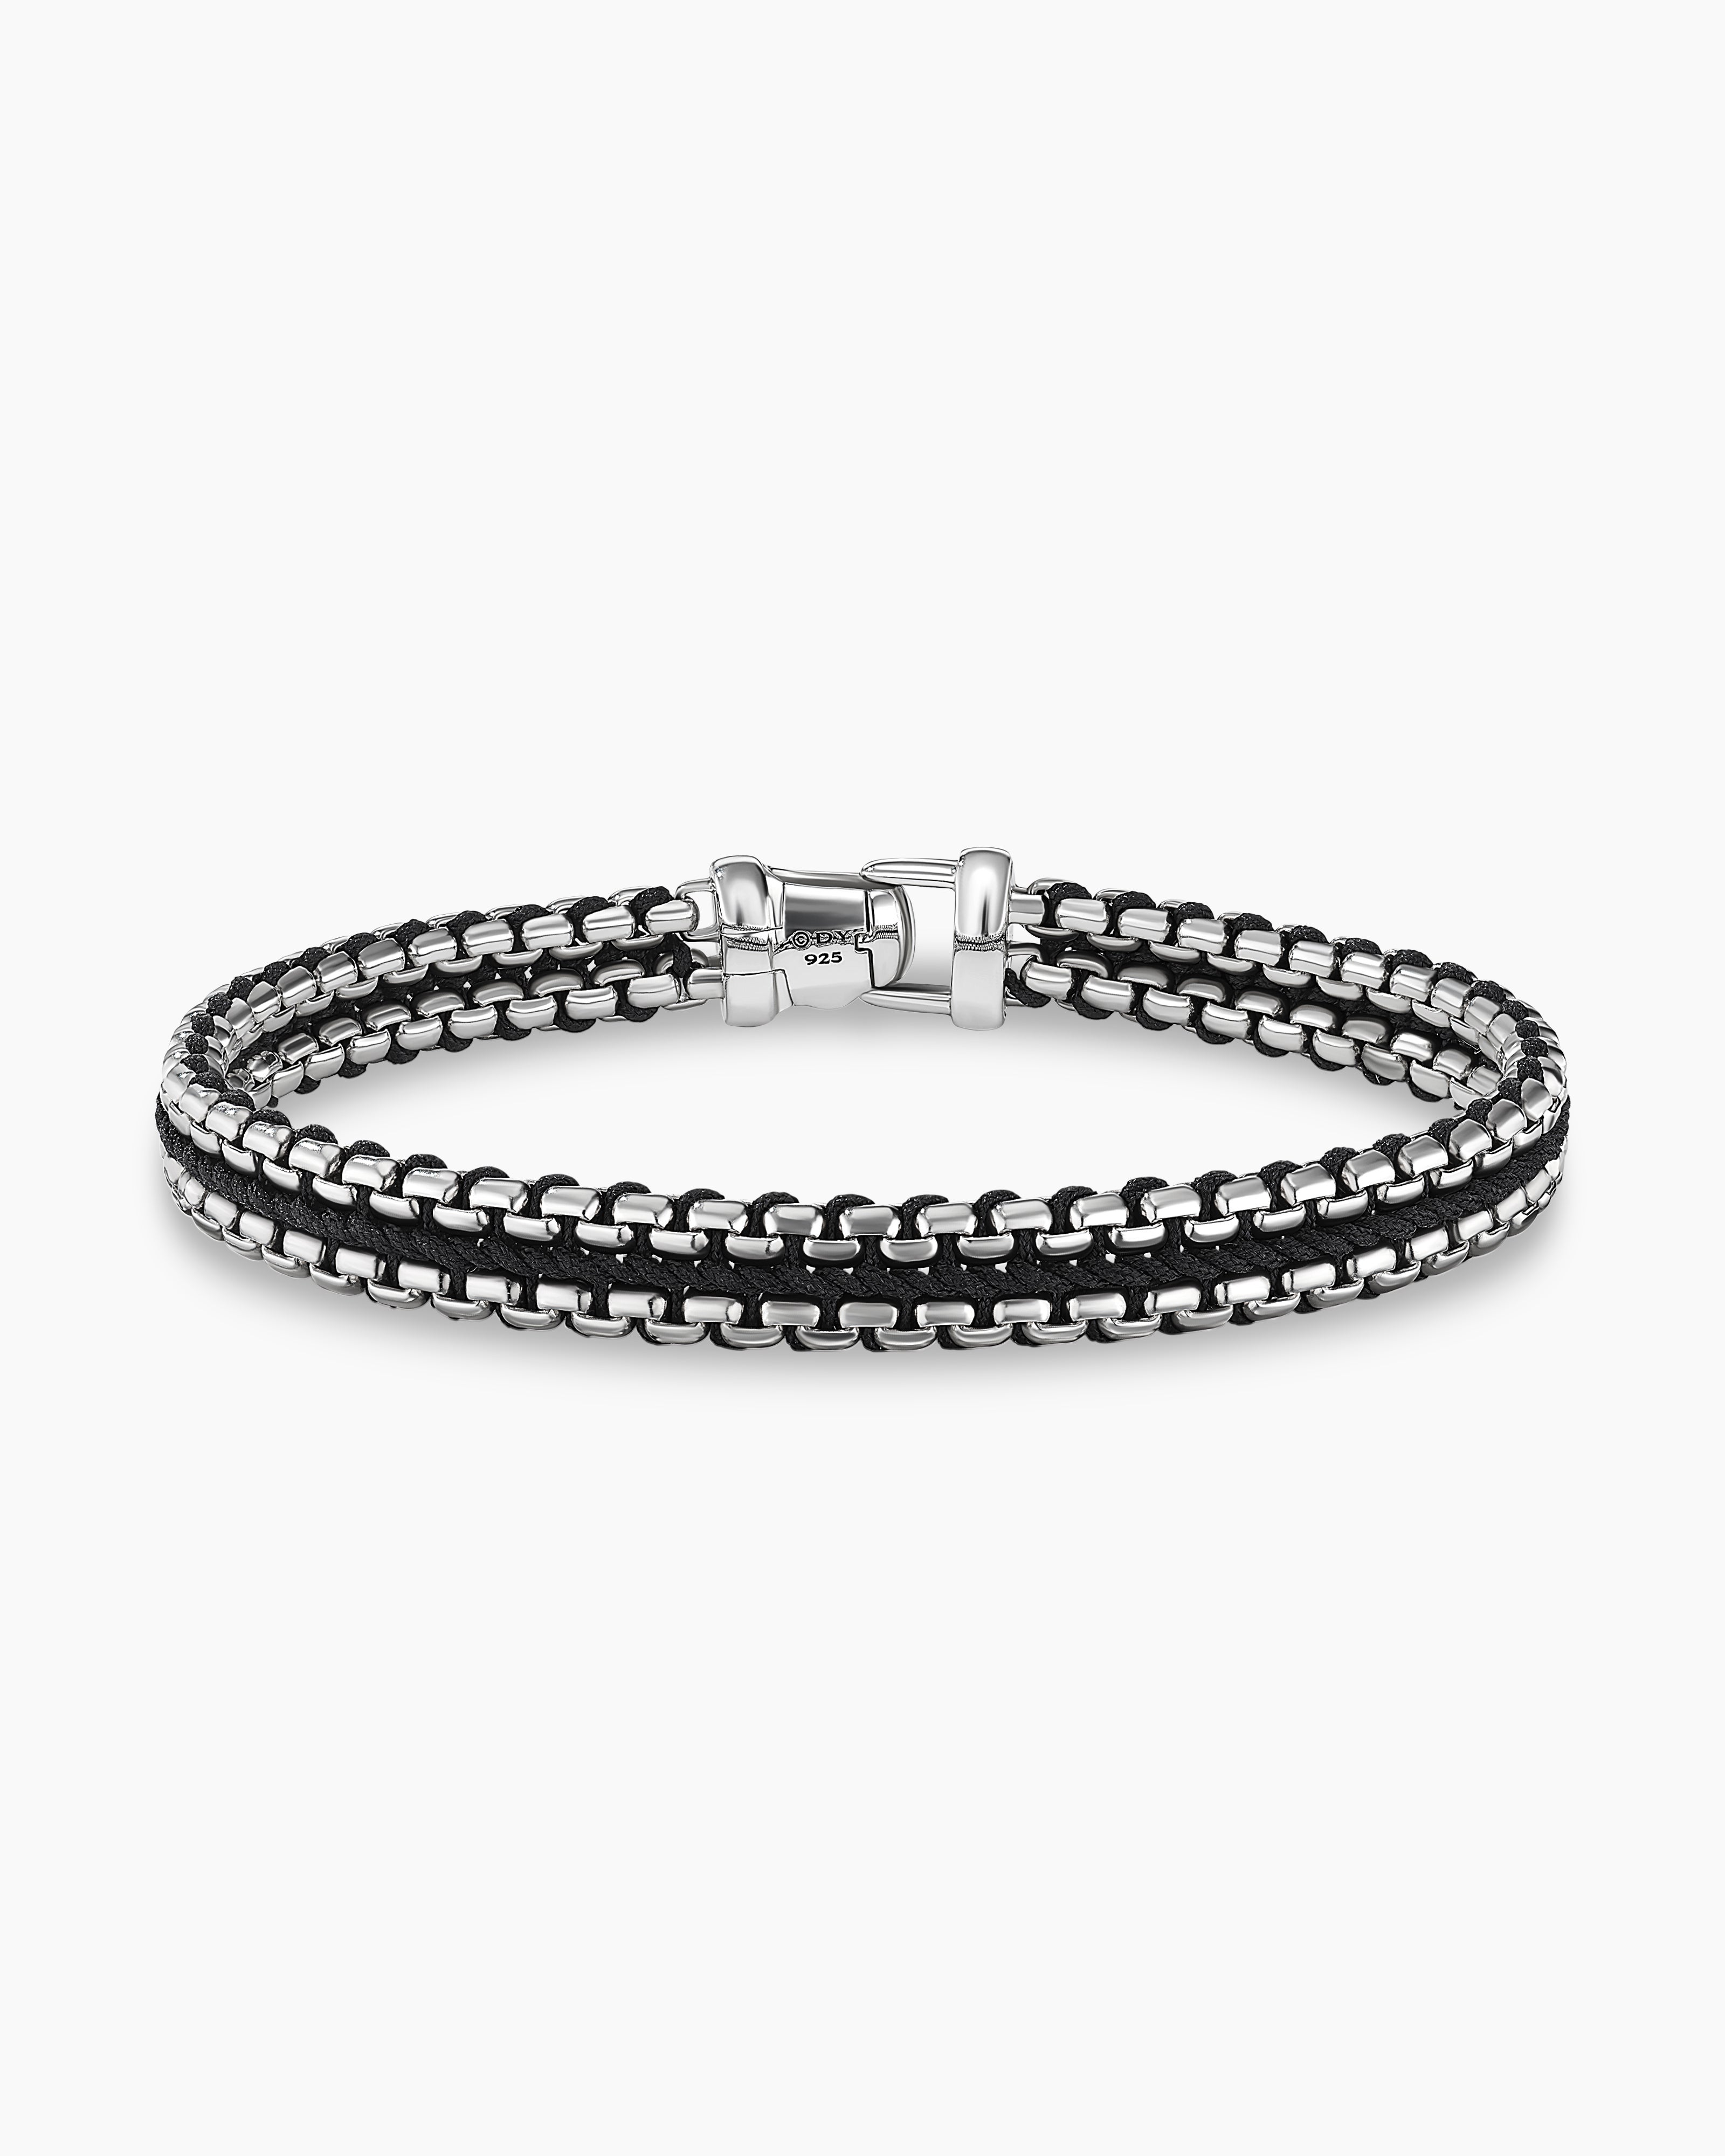 David Yurman DY Madison Chain Bracelet in Silver with 18K Gold, 8.5mm |  Neiman Marcus